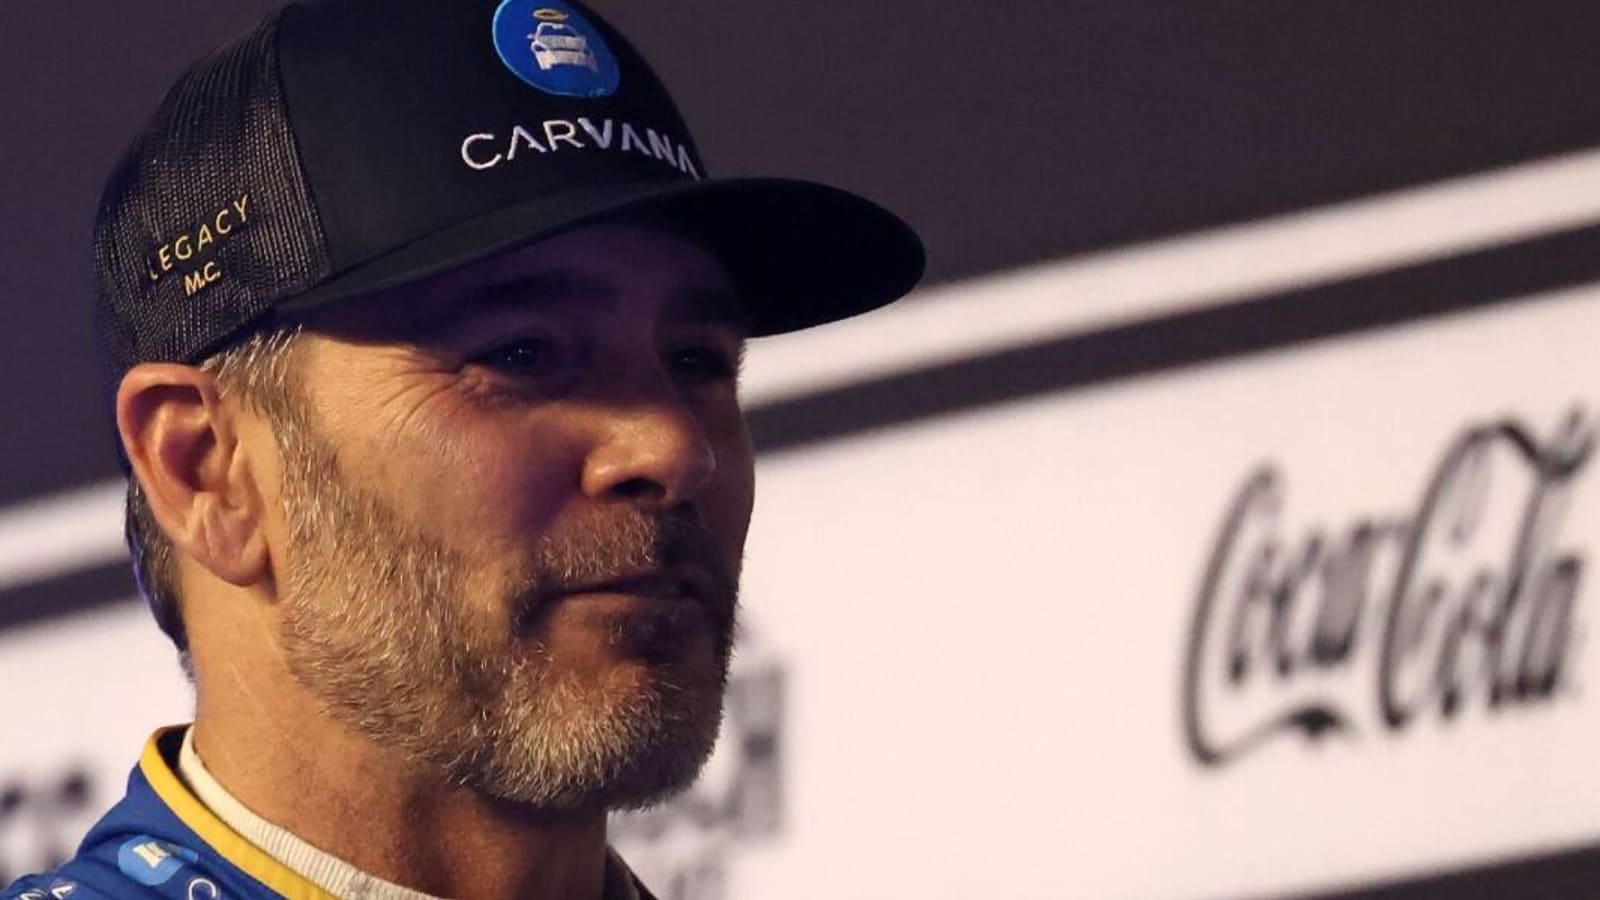 Jimmie Johnson to broadcast Indianapolis 500, race in Coca-Cola 600 in same day for NBC Sports